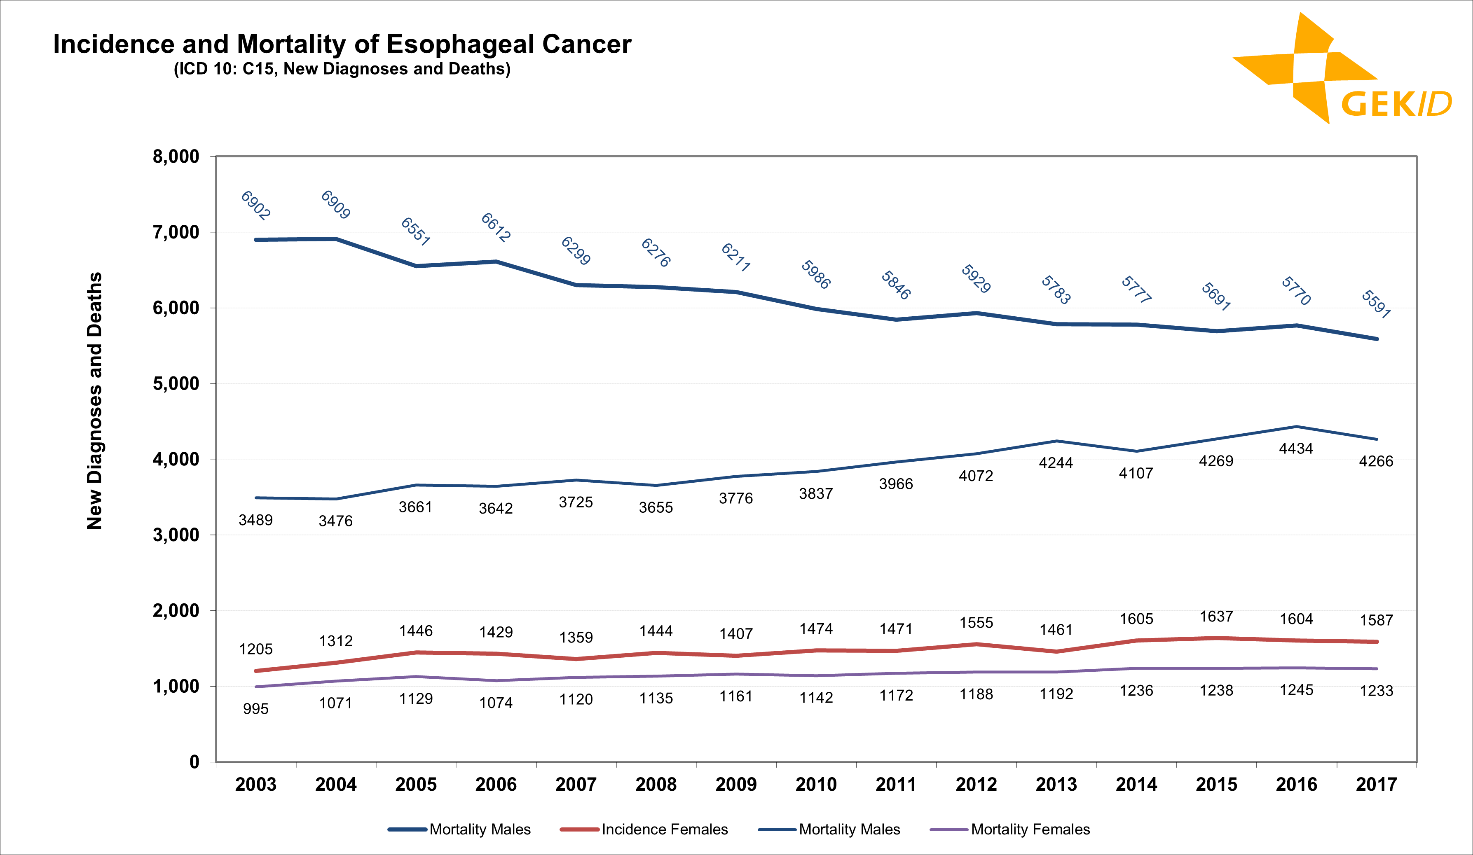 Incidence and mortality of esophageal cancer (ICD 10: C15) in Germany